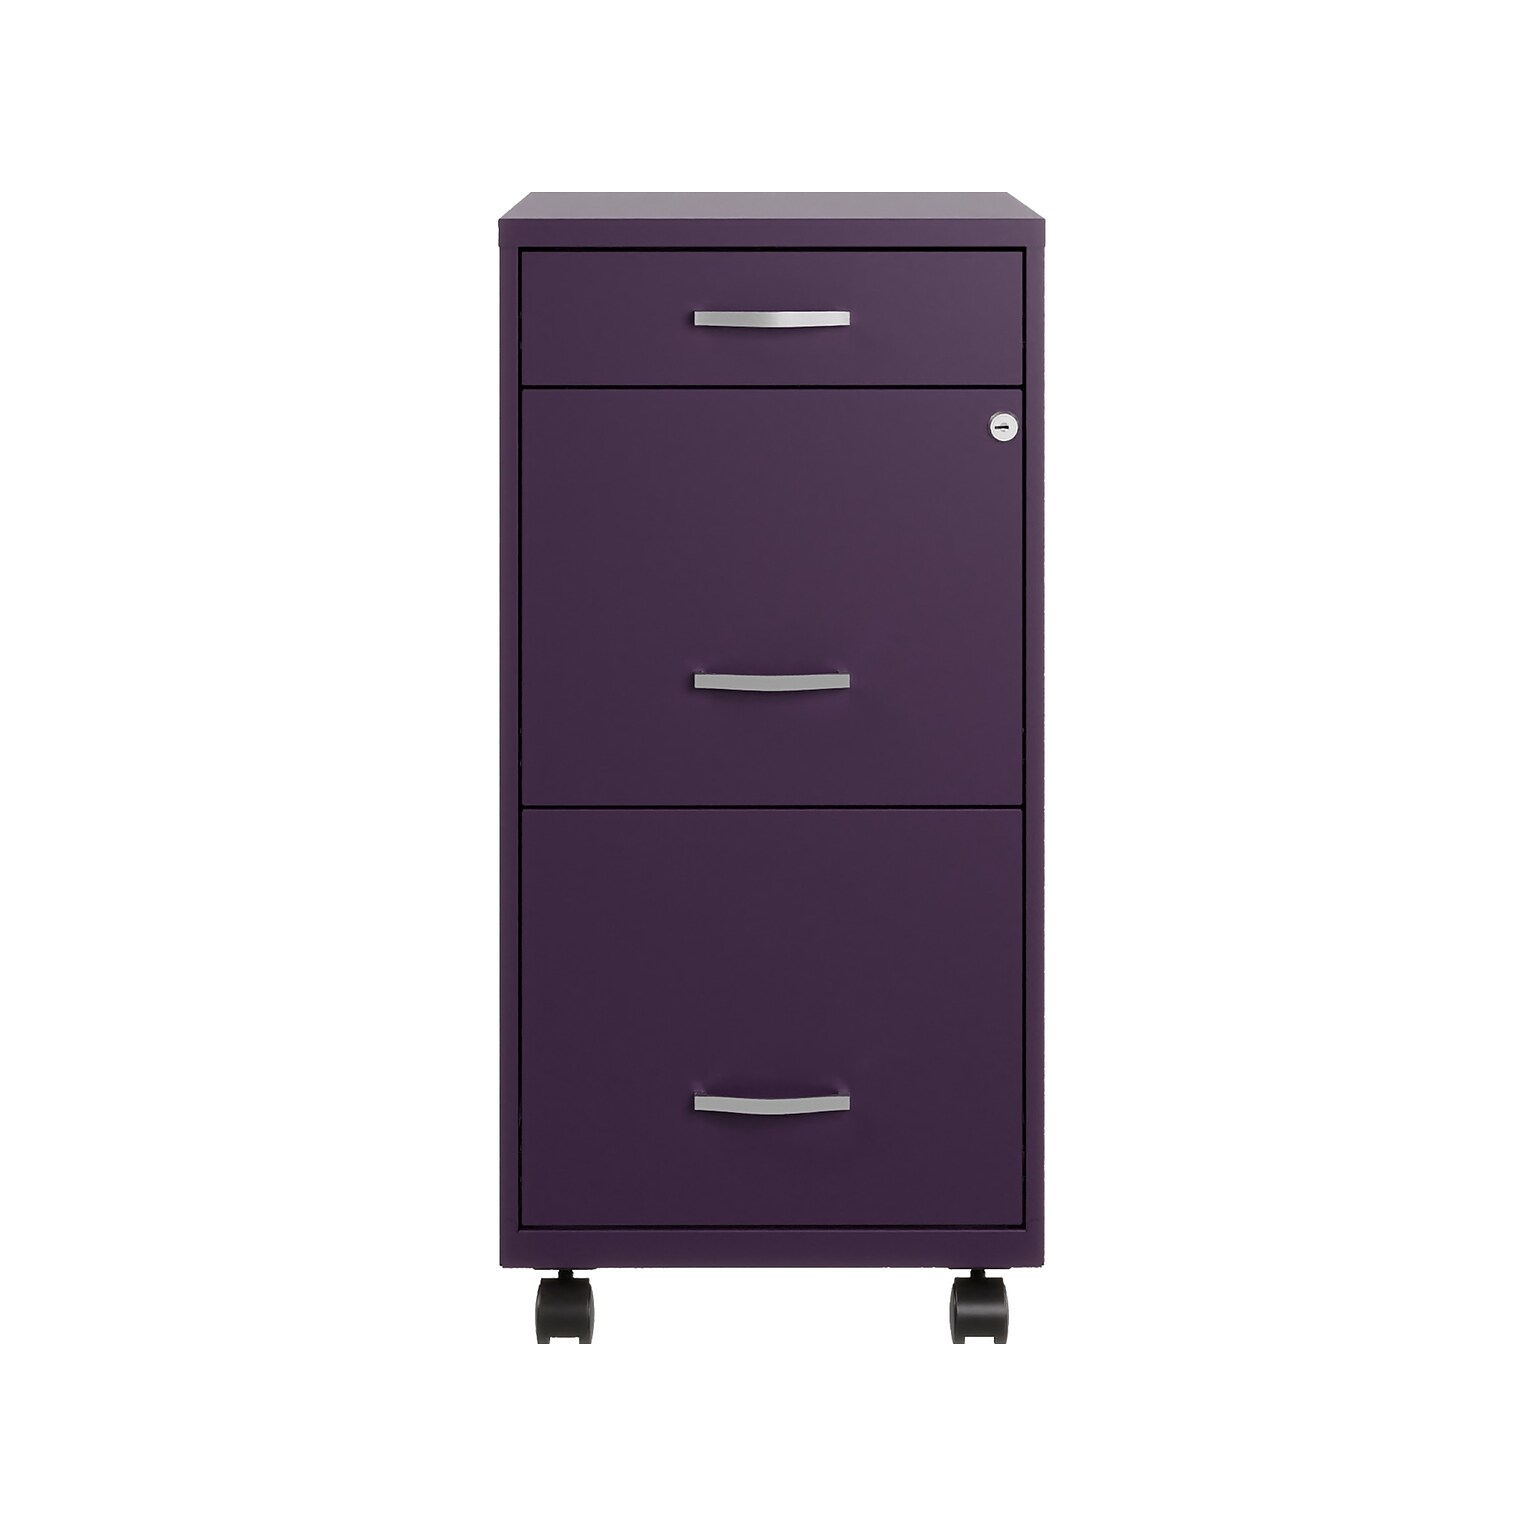 Space Solutions SOHO Organizer 3-Drawer Mobile Vertical File Cabinet, Letter Size, Lockable, Midnight Purple (25285)